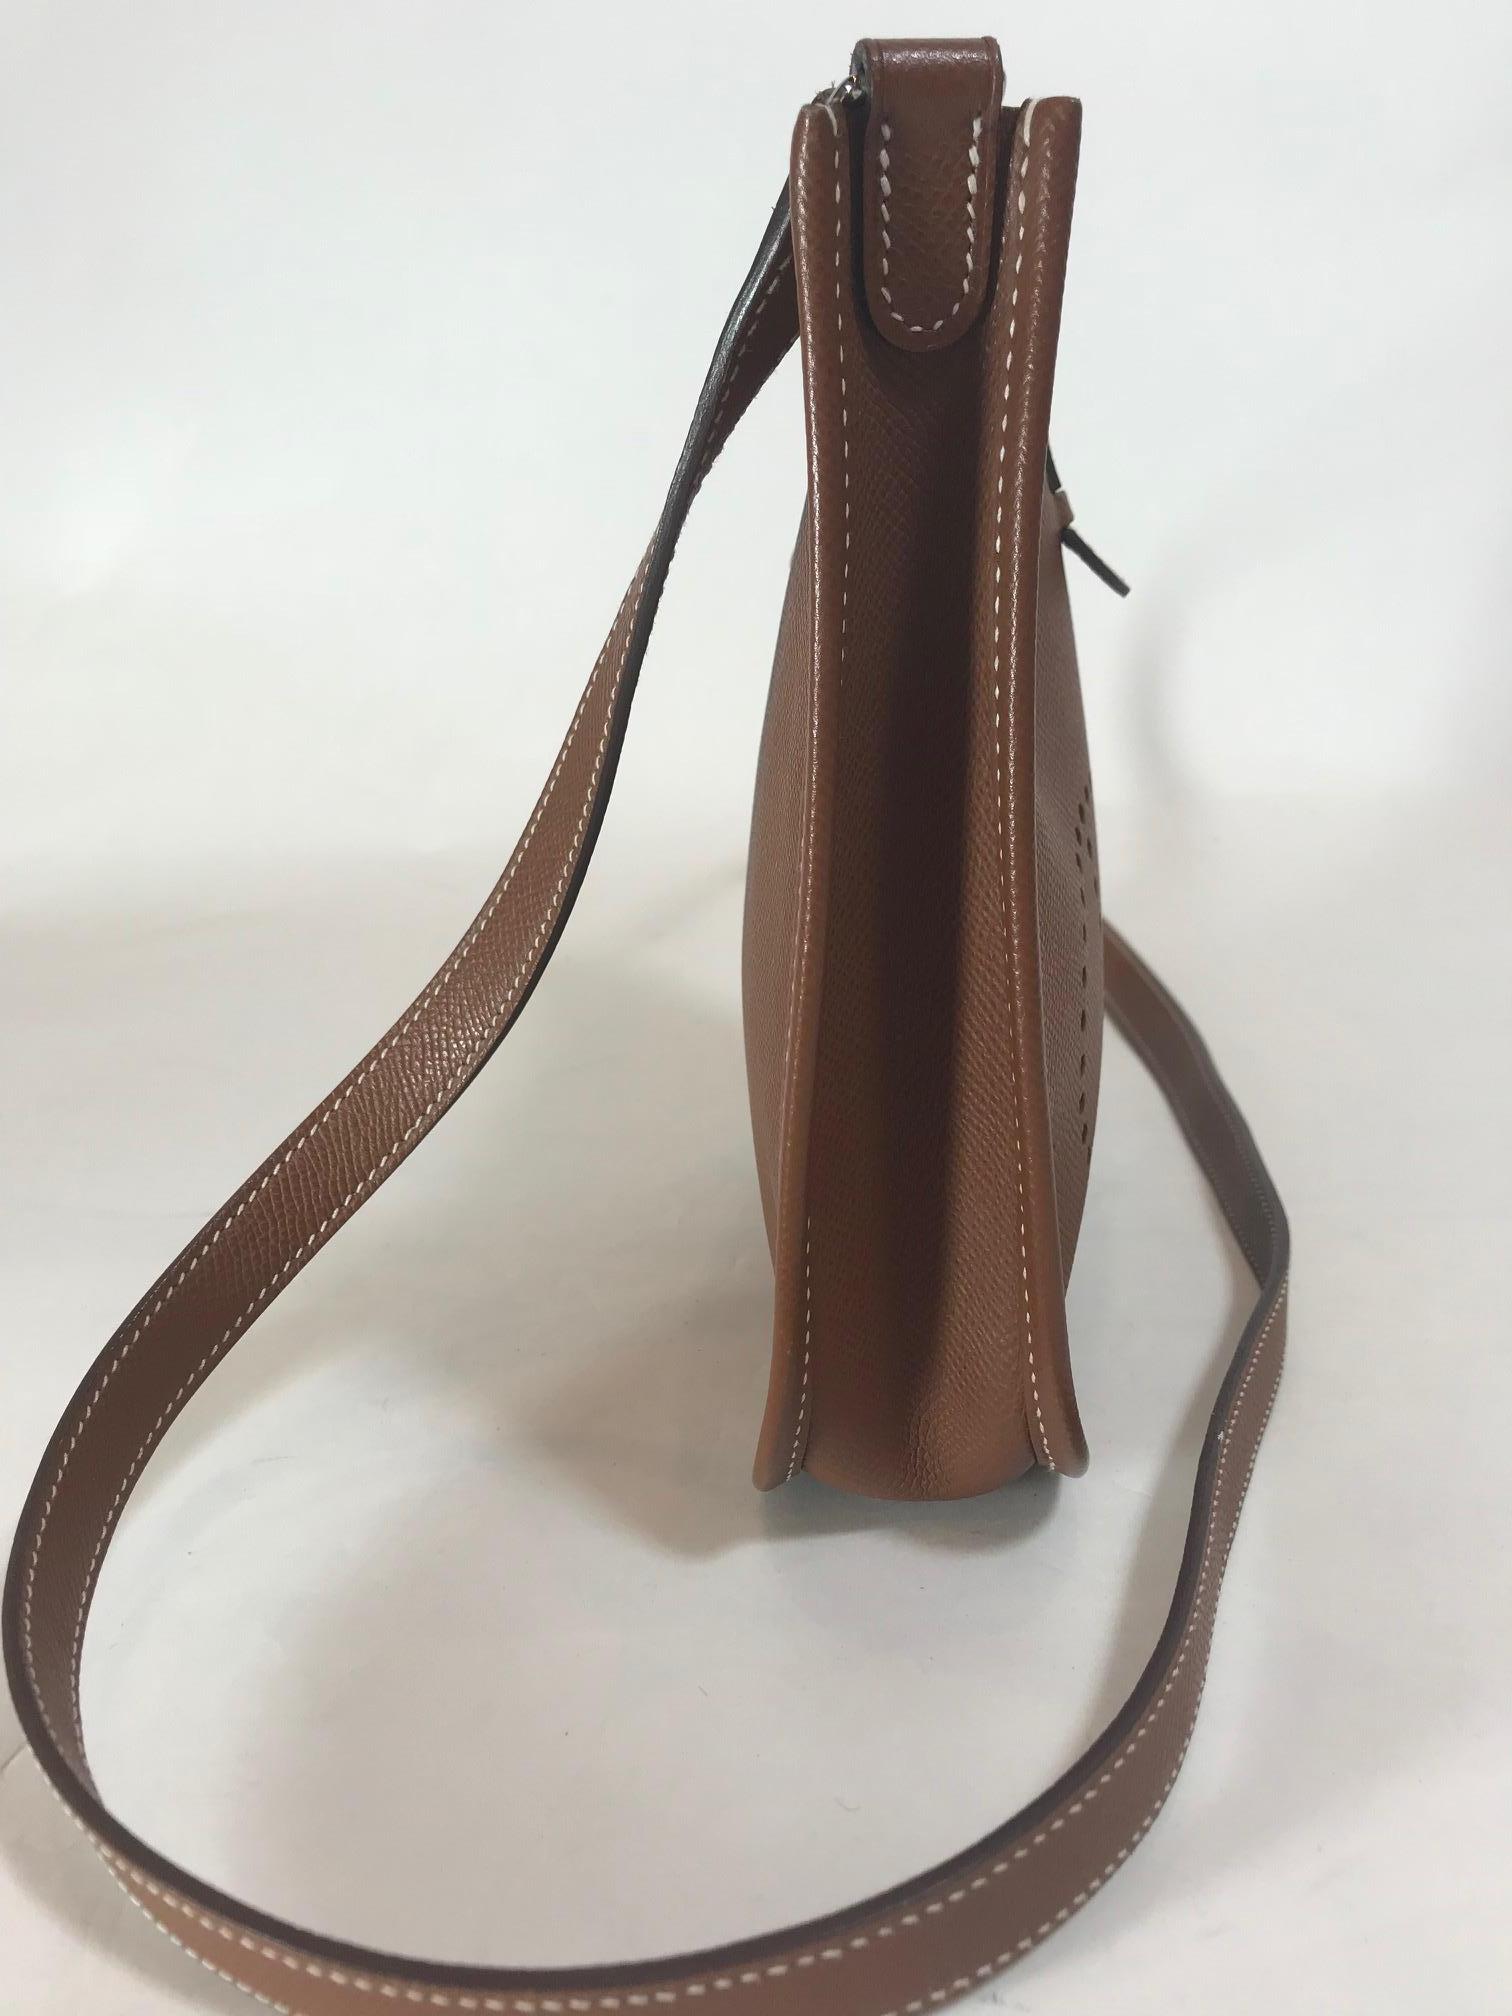 Hermes brown courchevel. Palladium-plated silver hardware. Snap closure at back. Single flat shoulder strap. Perforated logo at front. Tonal hide interior and snap closure at back. Blind stamped Square 